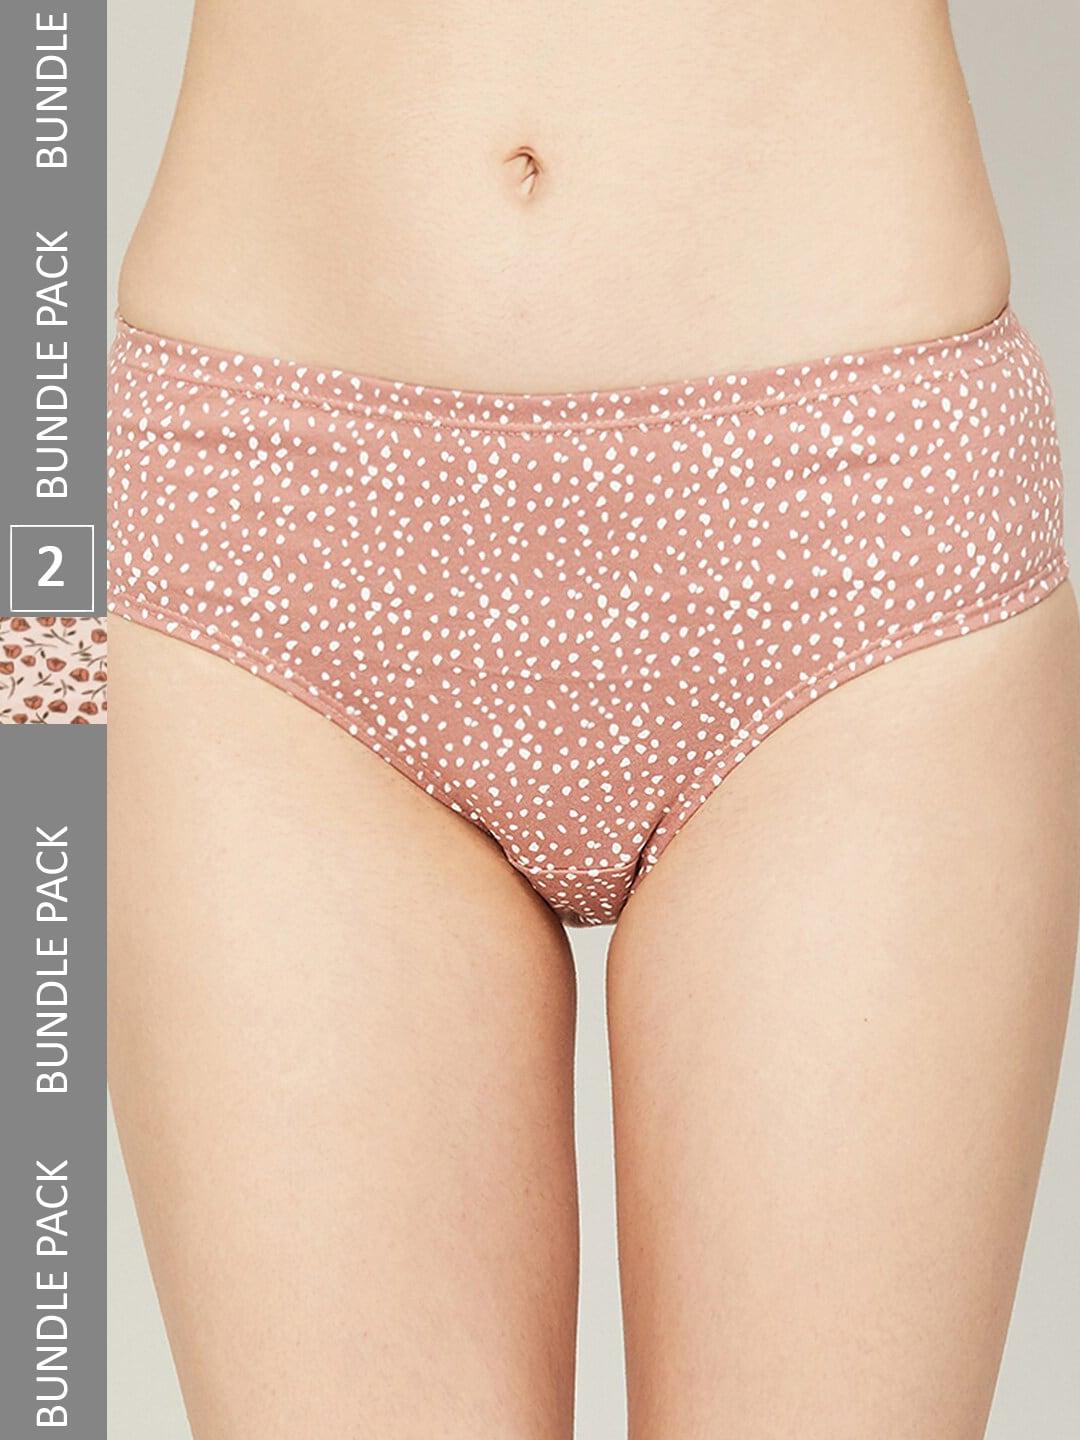 ginger-by-lifestyle-women-set-of-2-printed-cotton-briefs